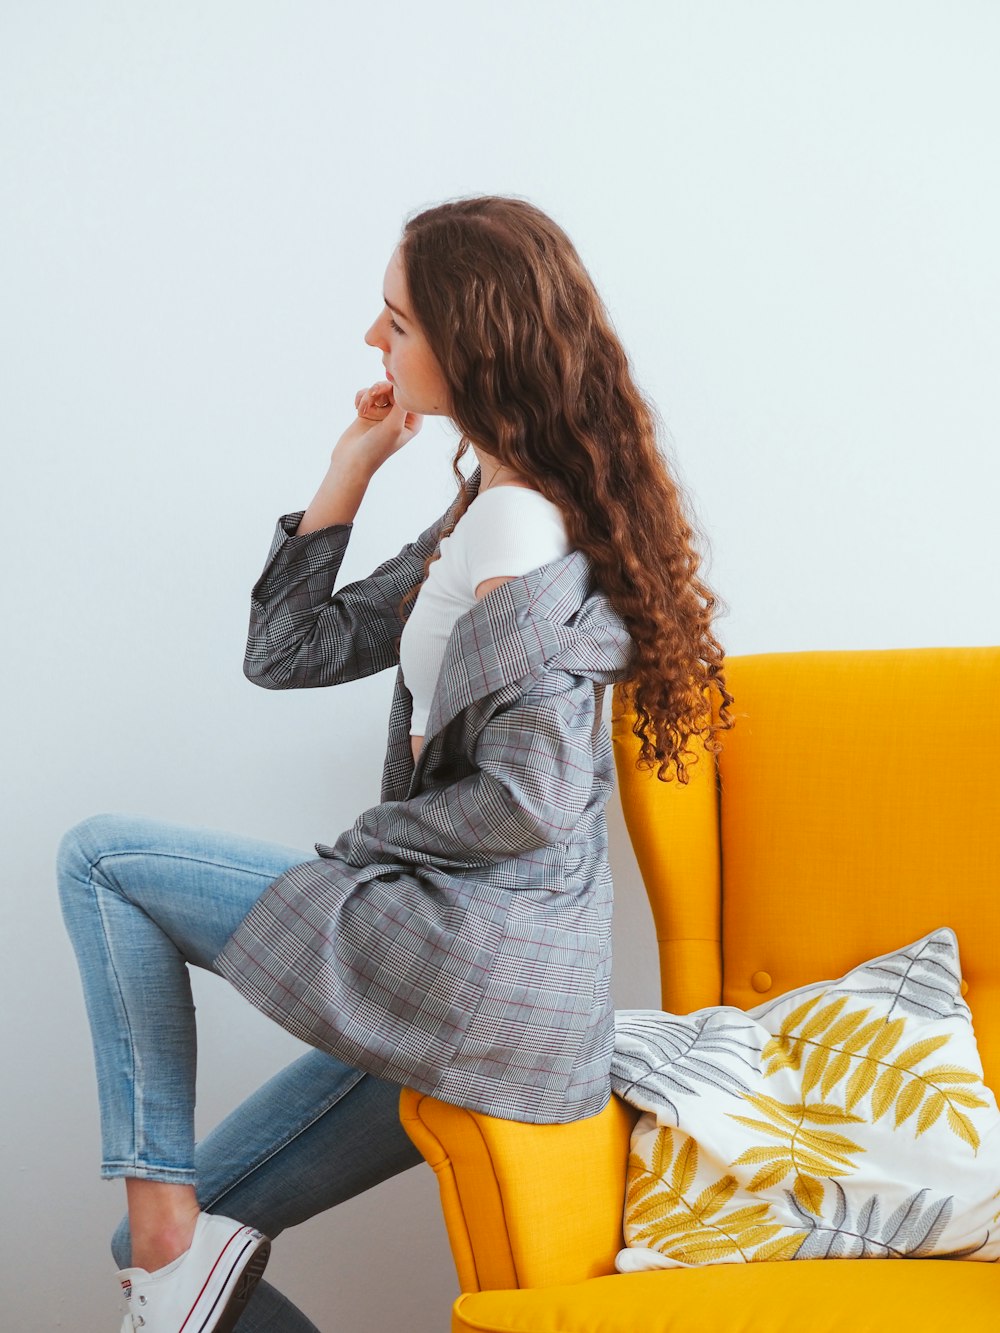 woman in blue denim jacket and blue denim jeans sitting on yellow couch